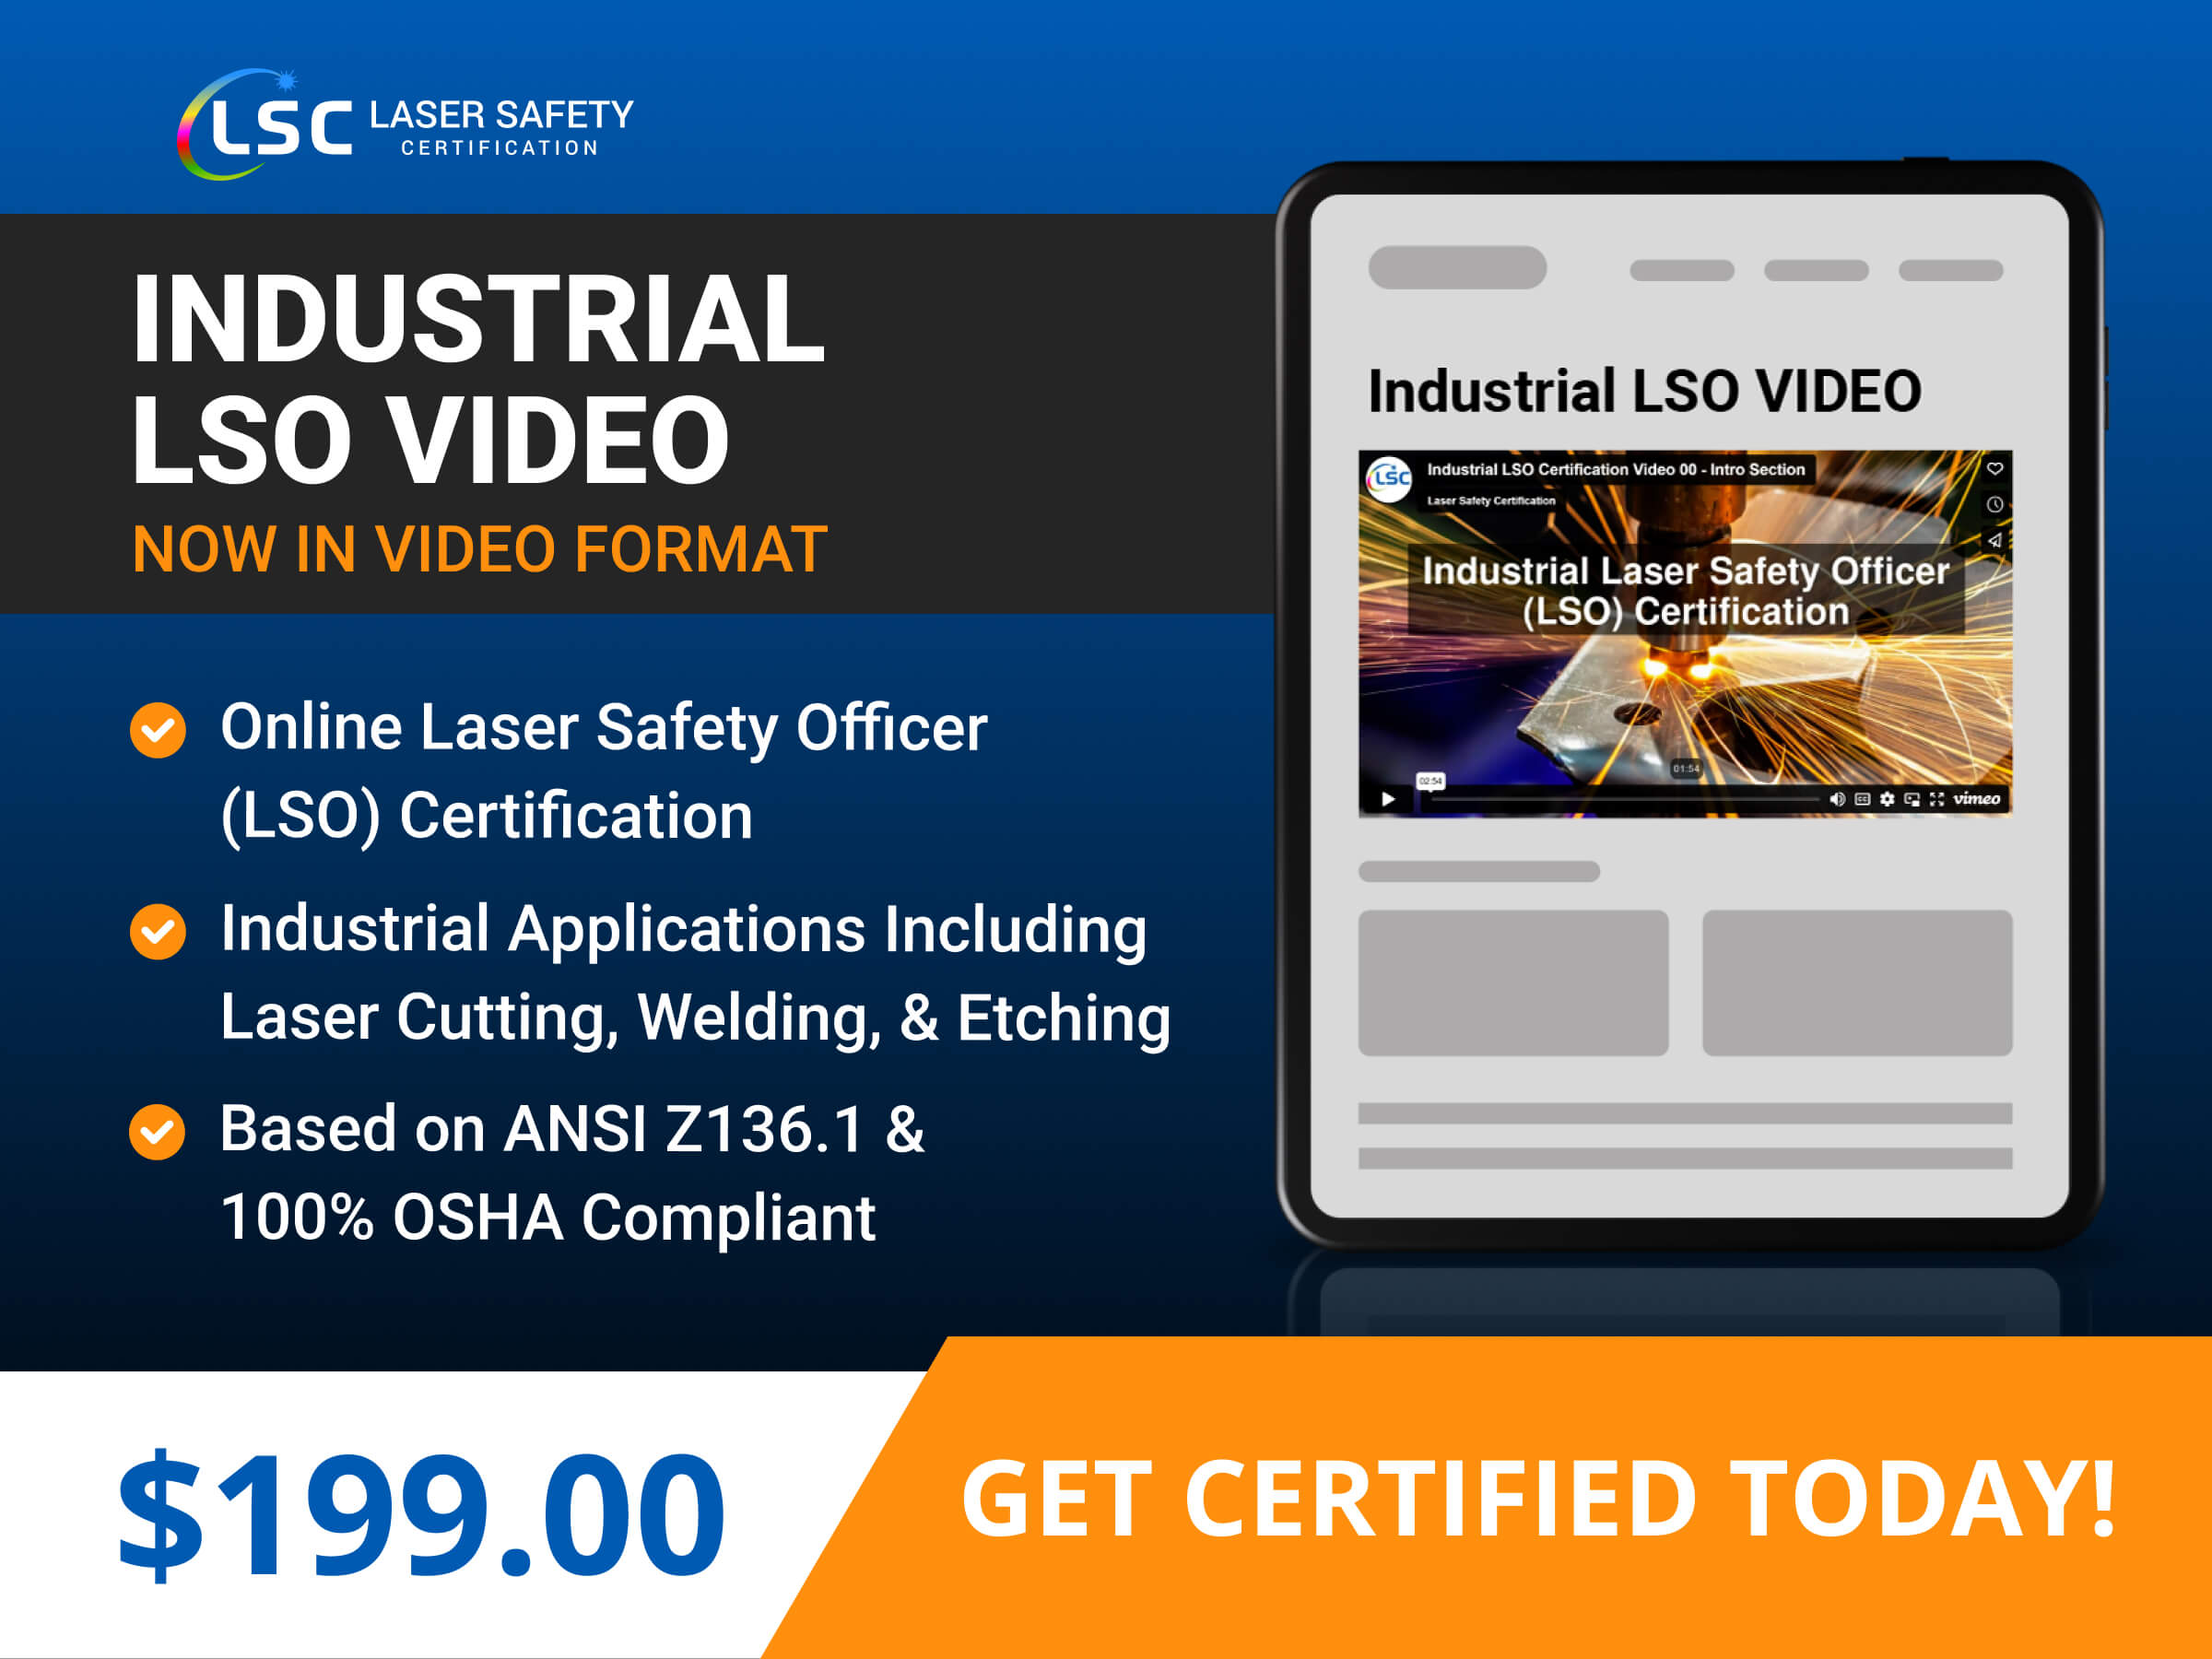 Industrial lso video.